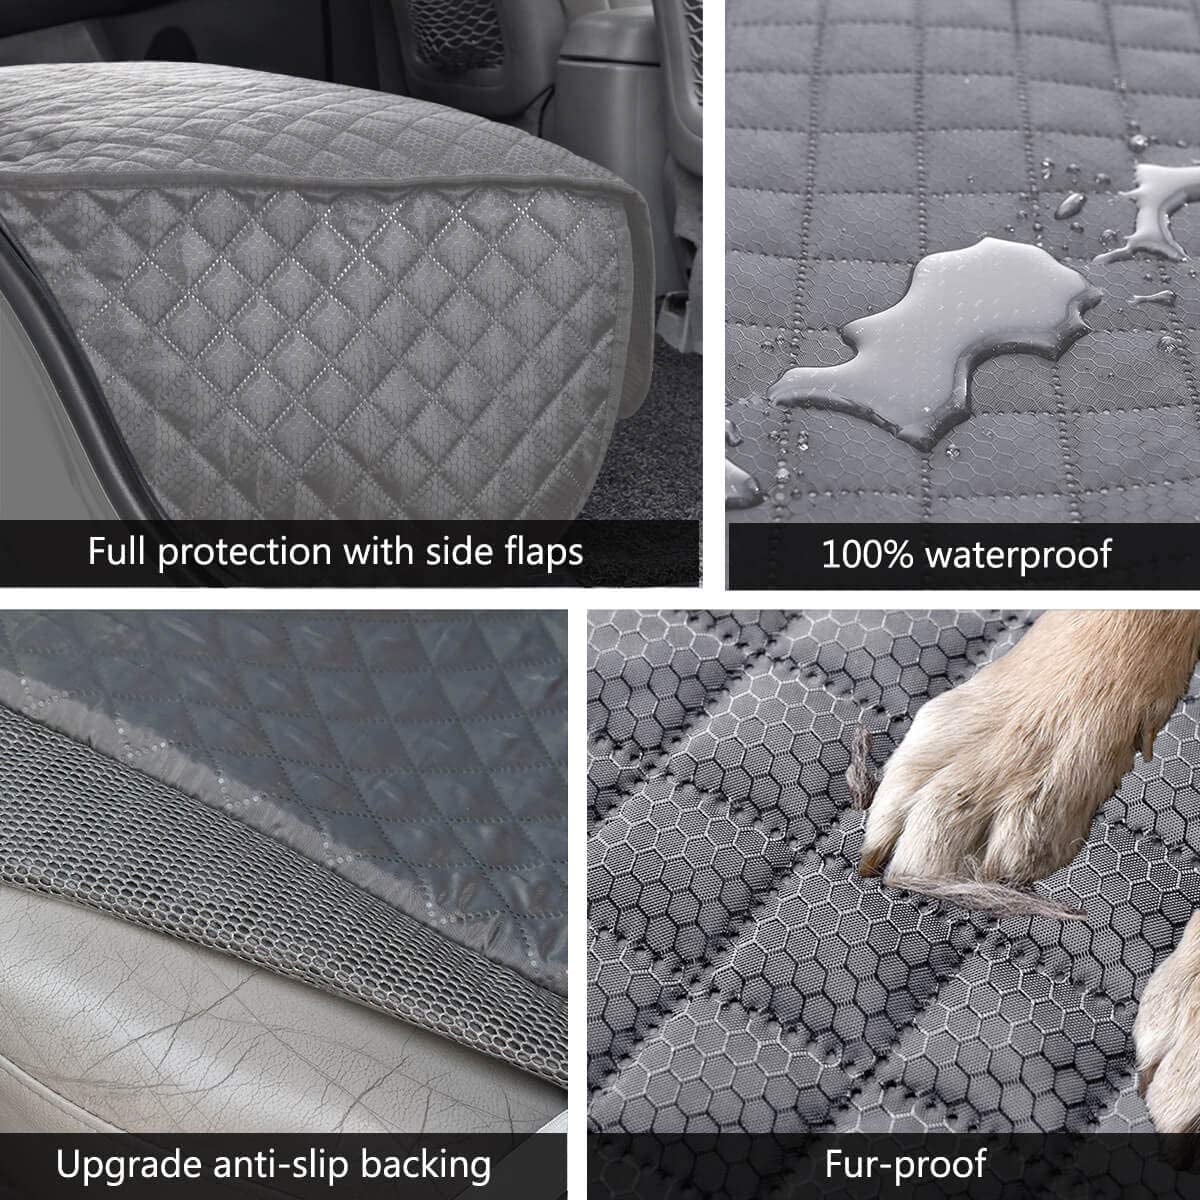 Heavy-Duty & Nonslip Back Seat Cover for Dogs,Washable & Compatible Pet Car Seat Cover for Cars 100% Waterproof Dog Car Seat Covers Vailge Bench Dog Seat Cover for Back Seat Trucks & SUVs